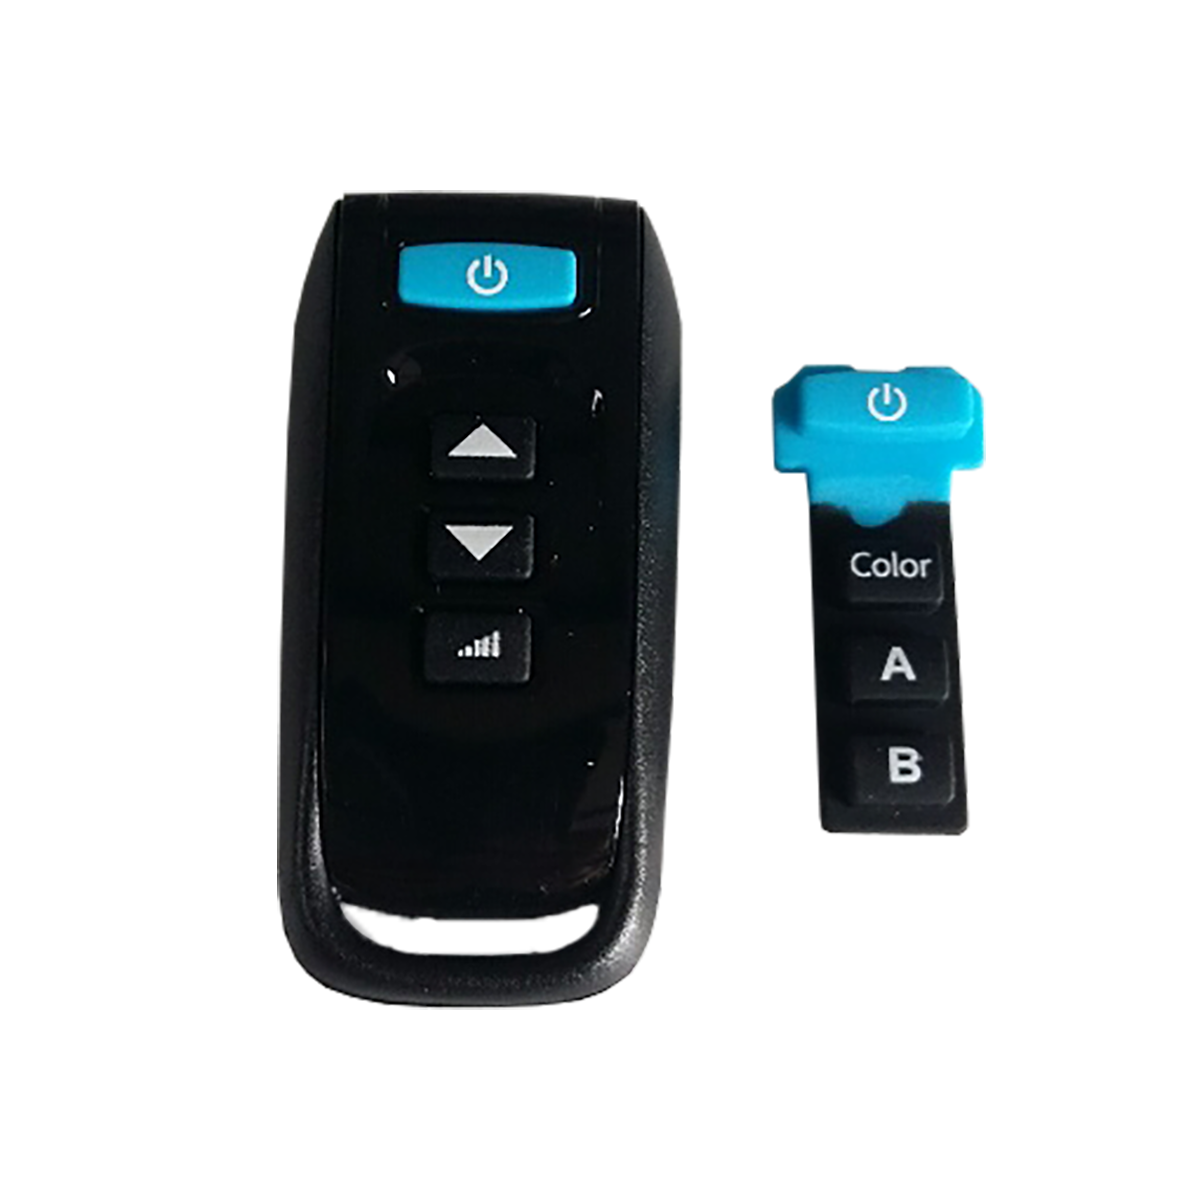 Replacement hand transmitter for remote controls Replacement hand transmitter for remote controls